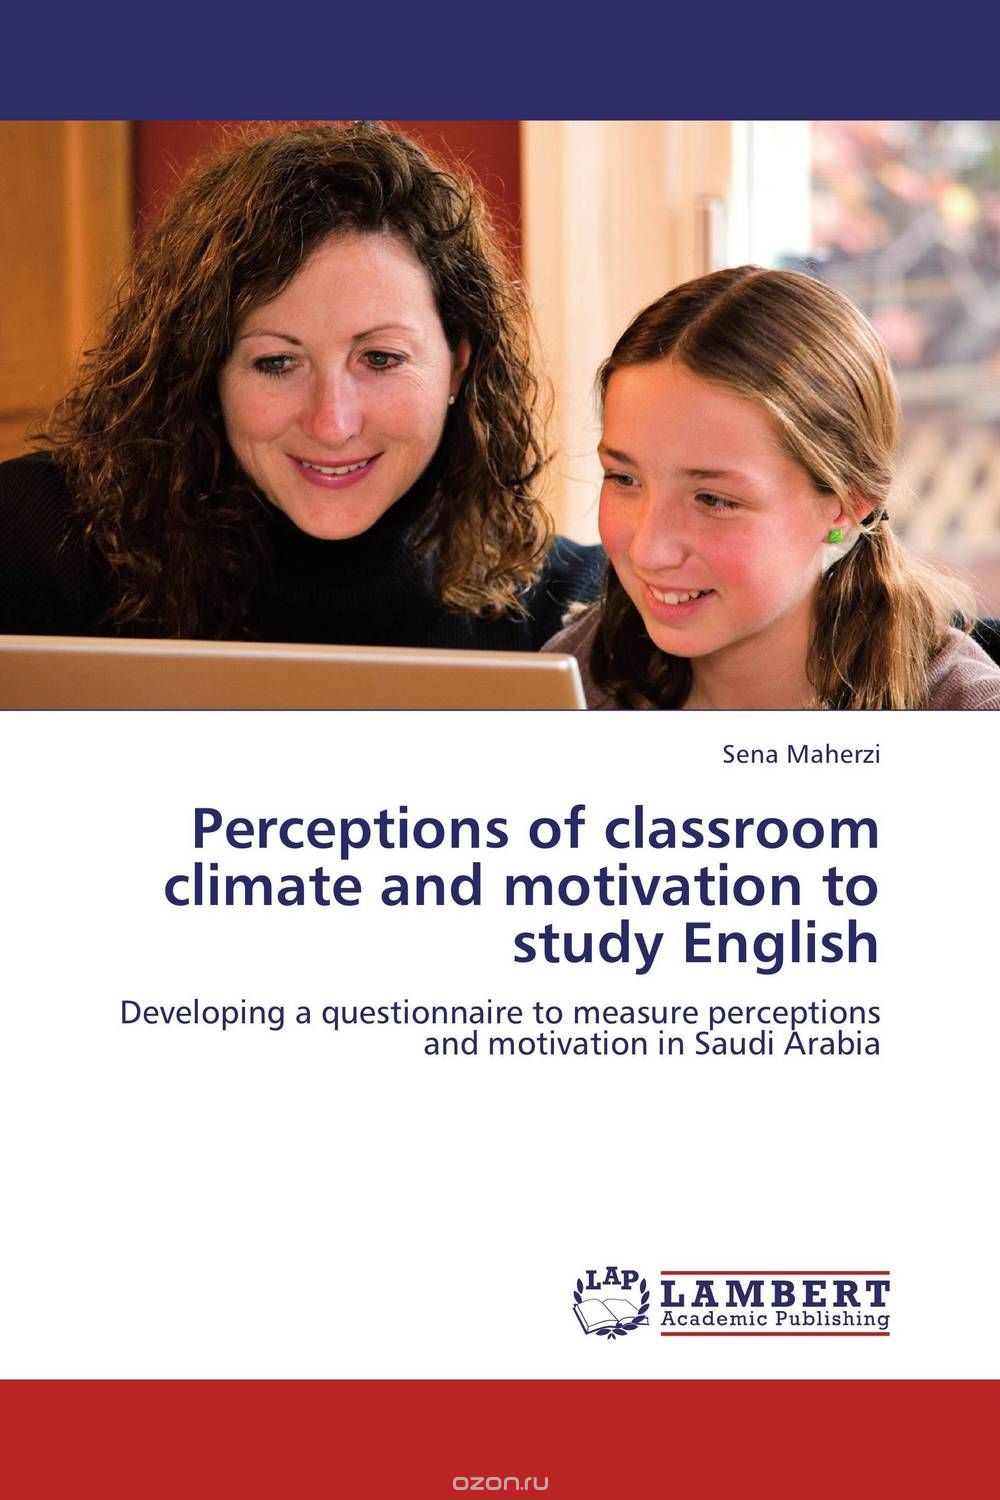 Perceptions of classroom climate and motivation to study English